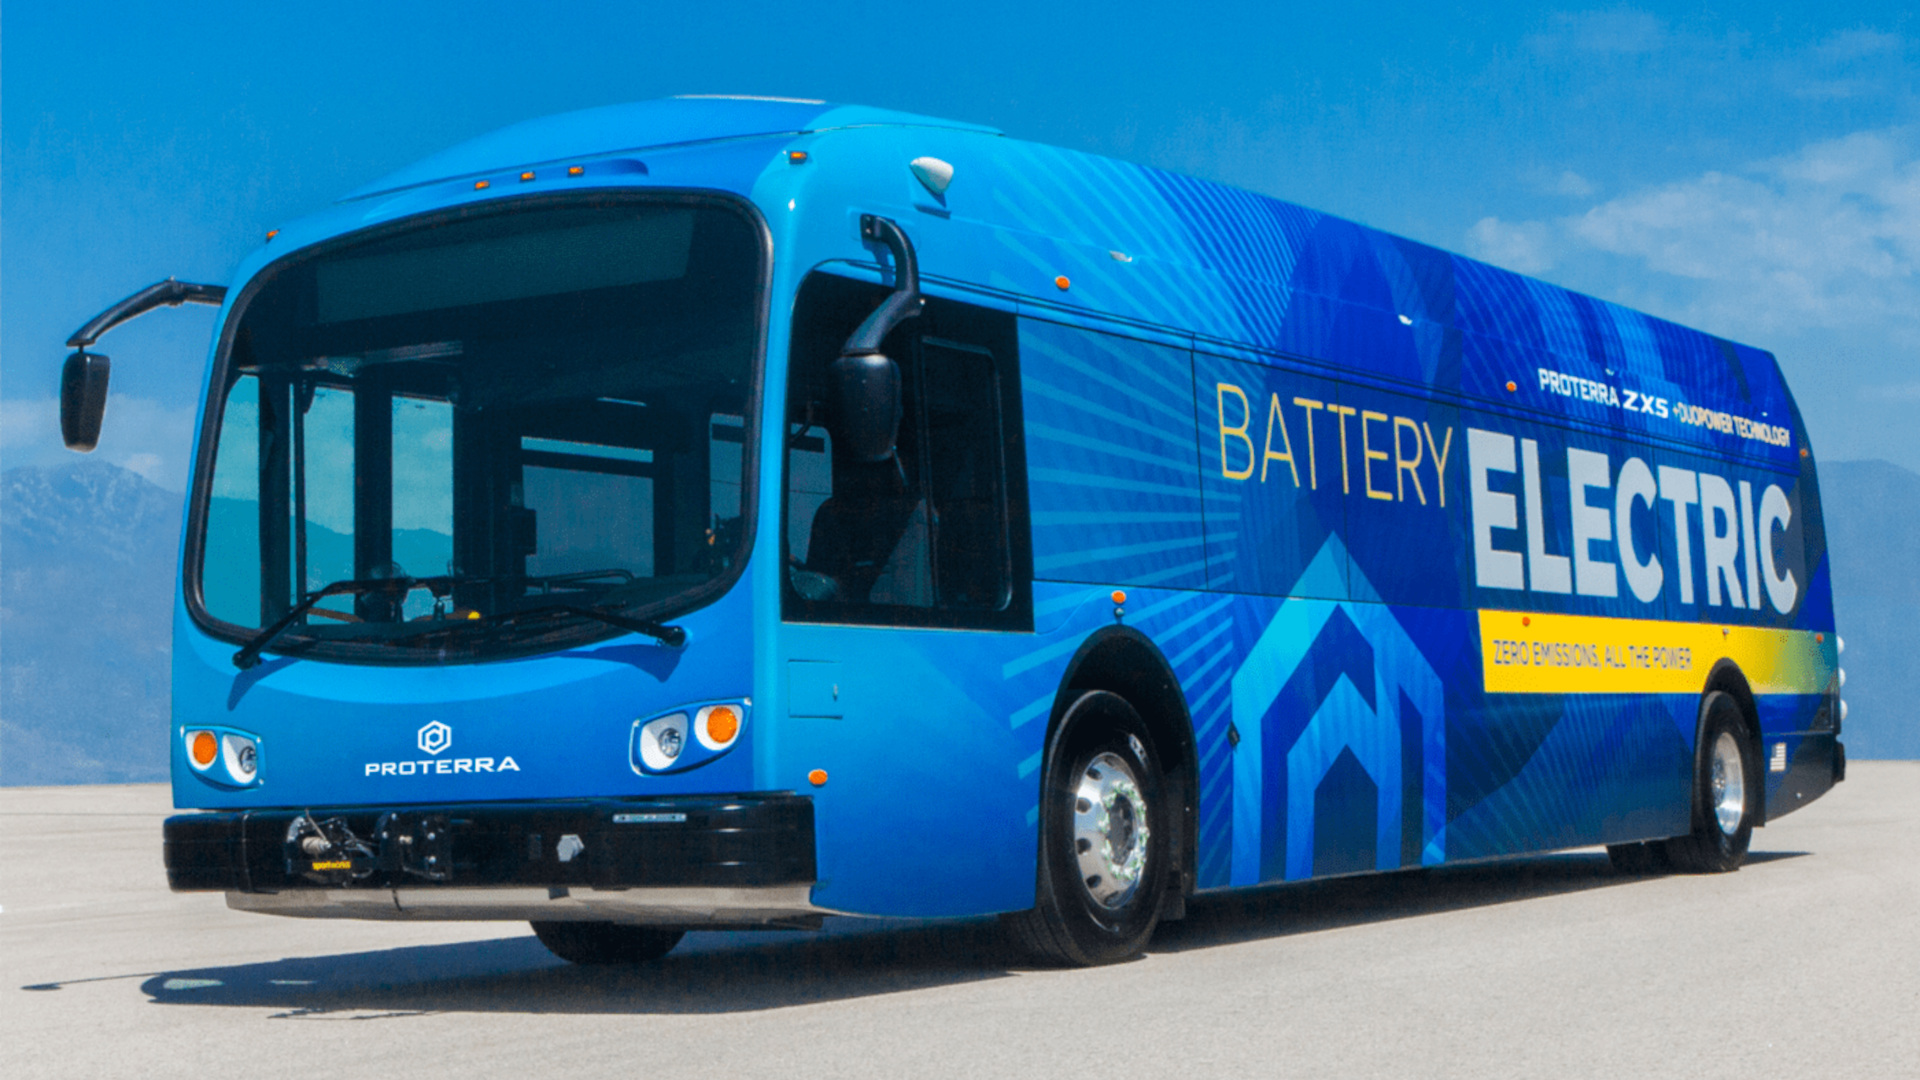 This Electric Bus Has a Battery Pack Over 3 Times